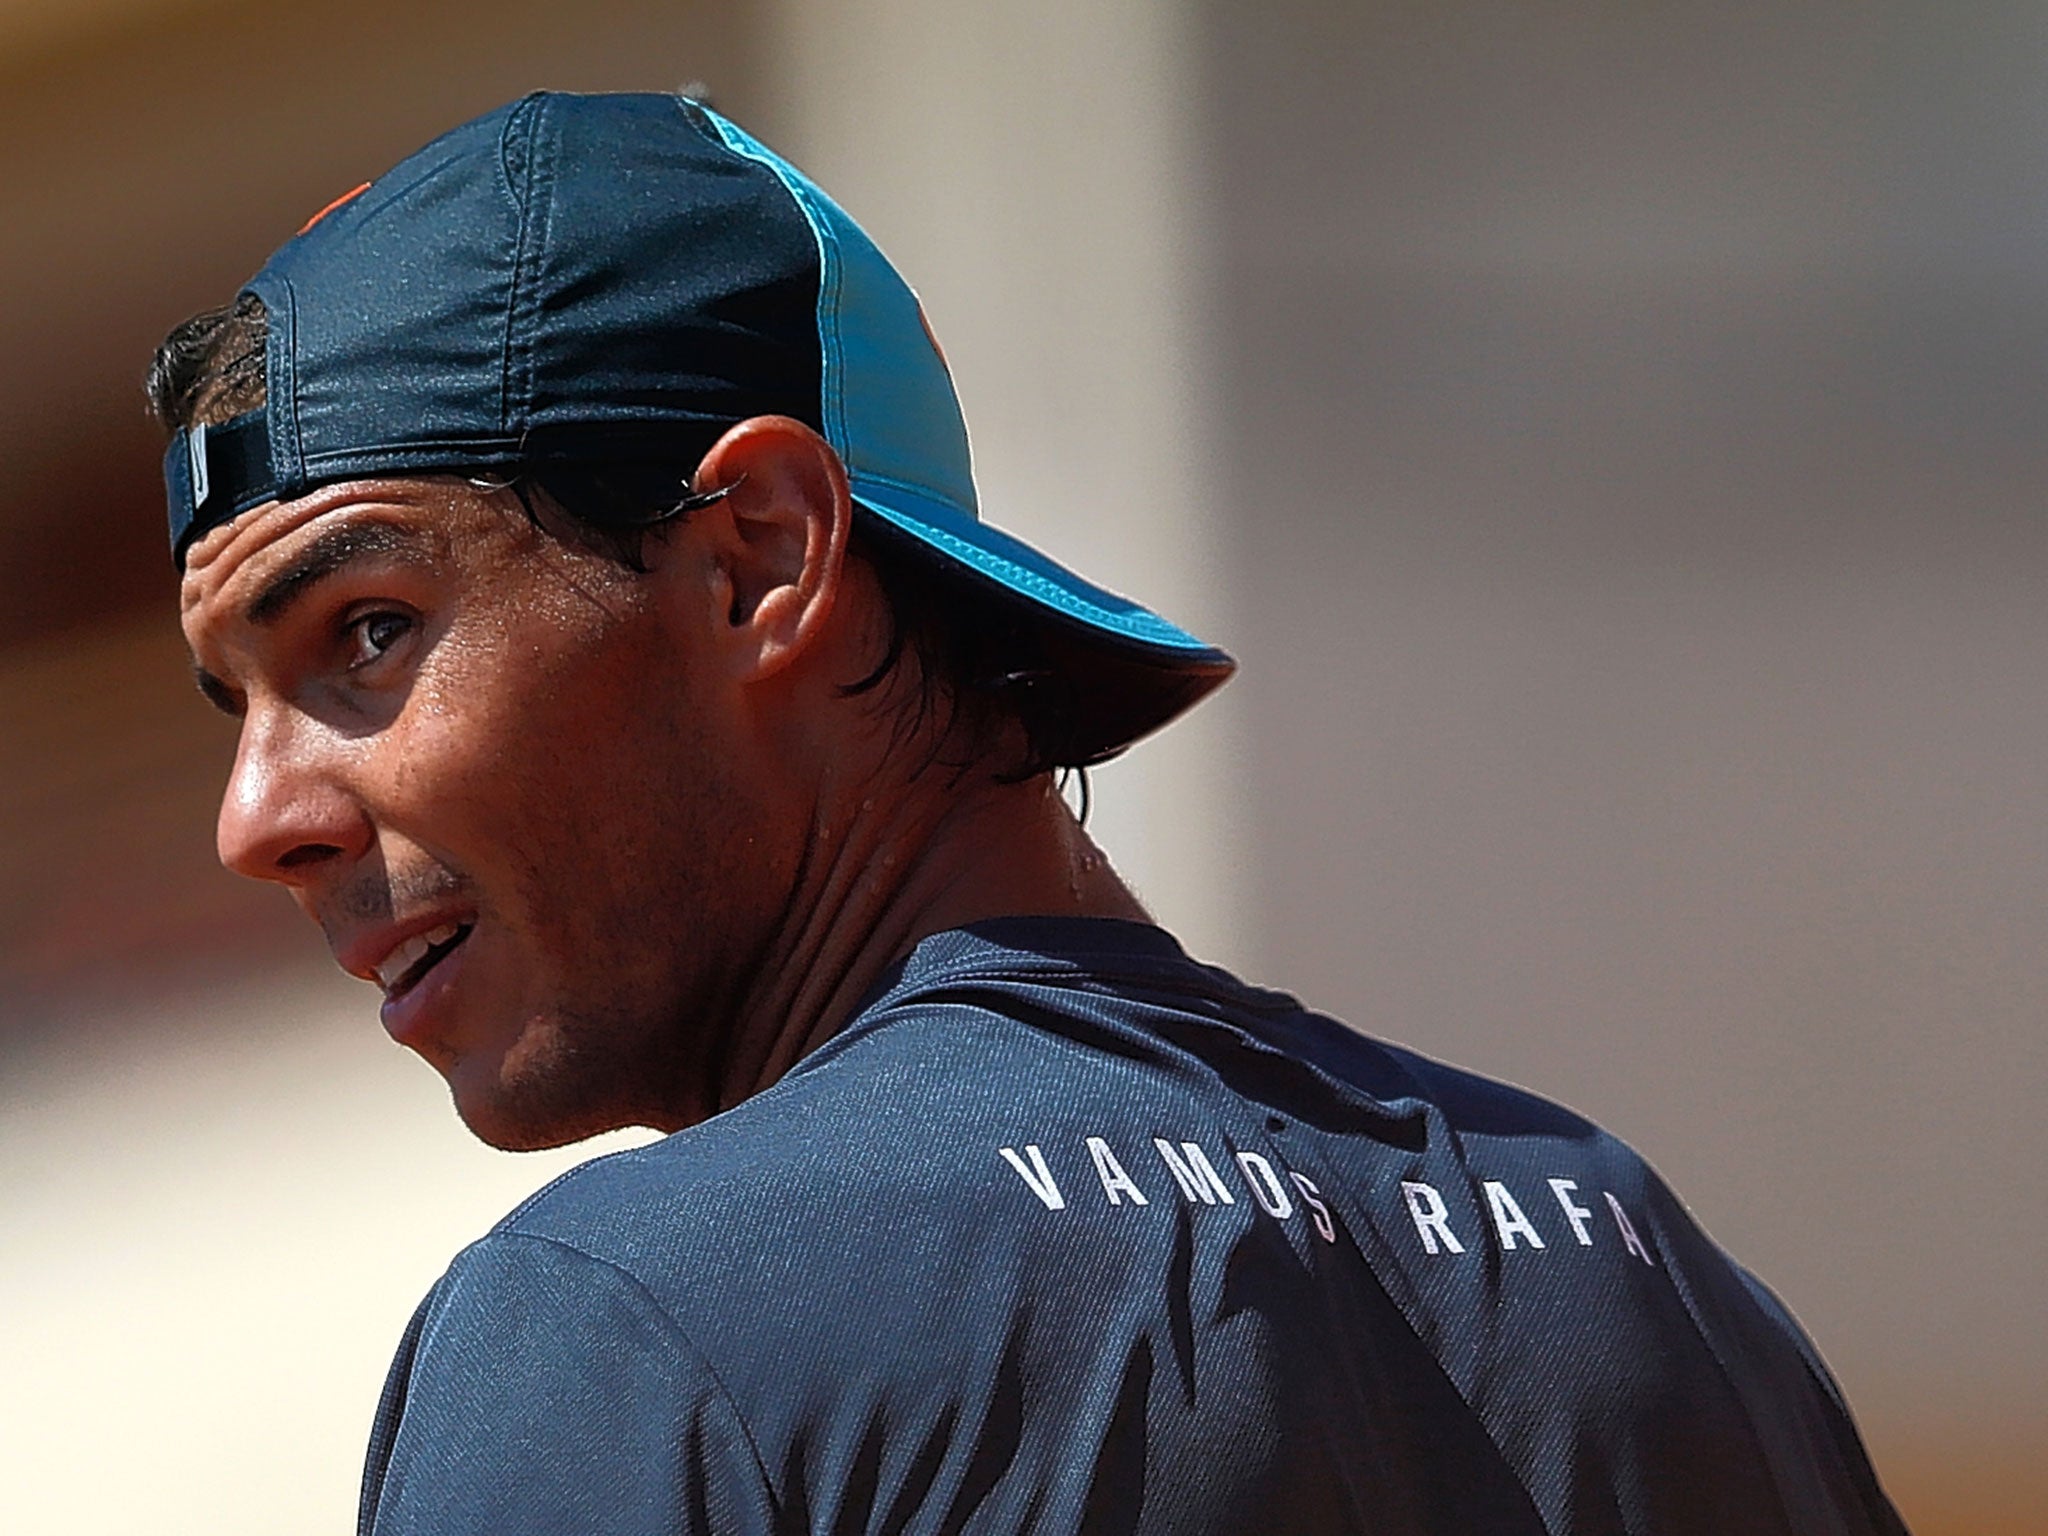 Rafael Nadal has reached just one final since his triumph at Roland Garros last June